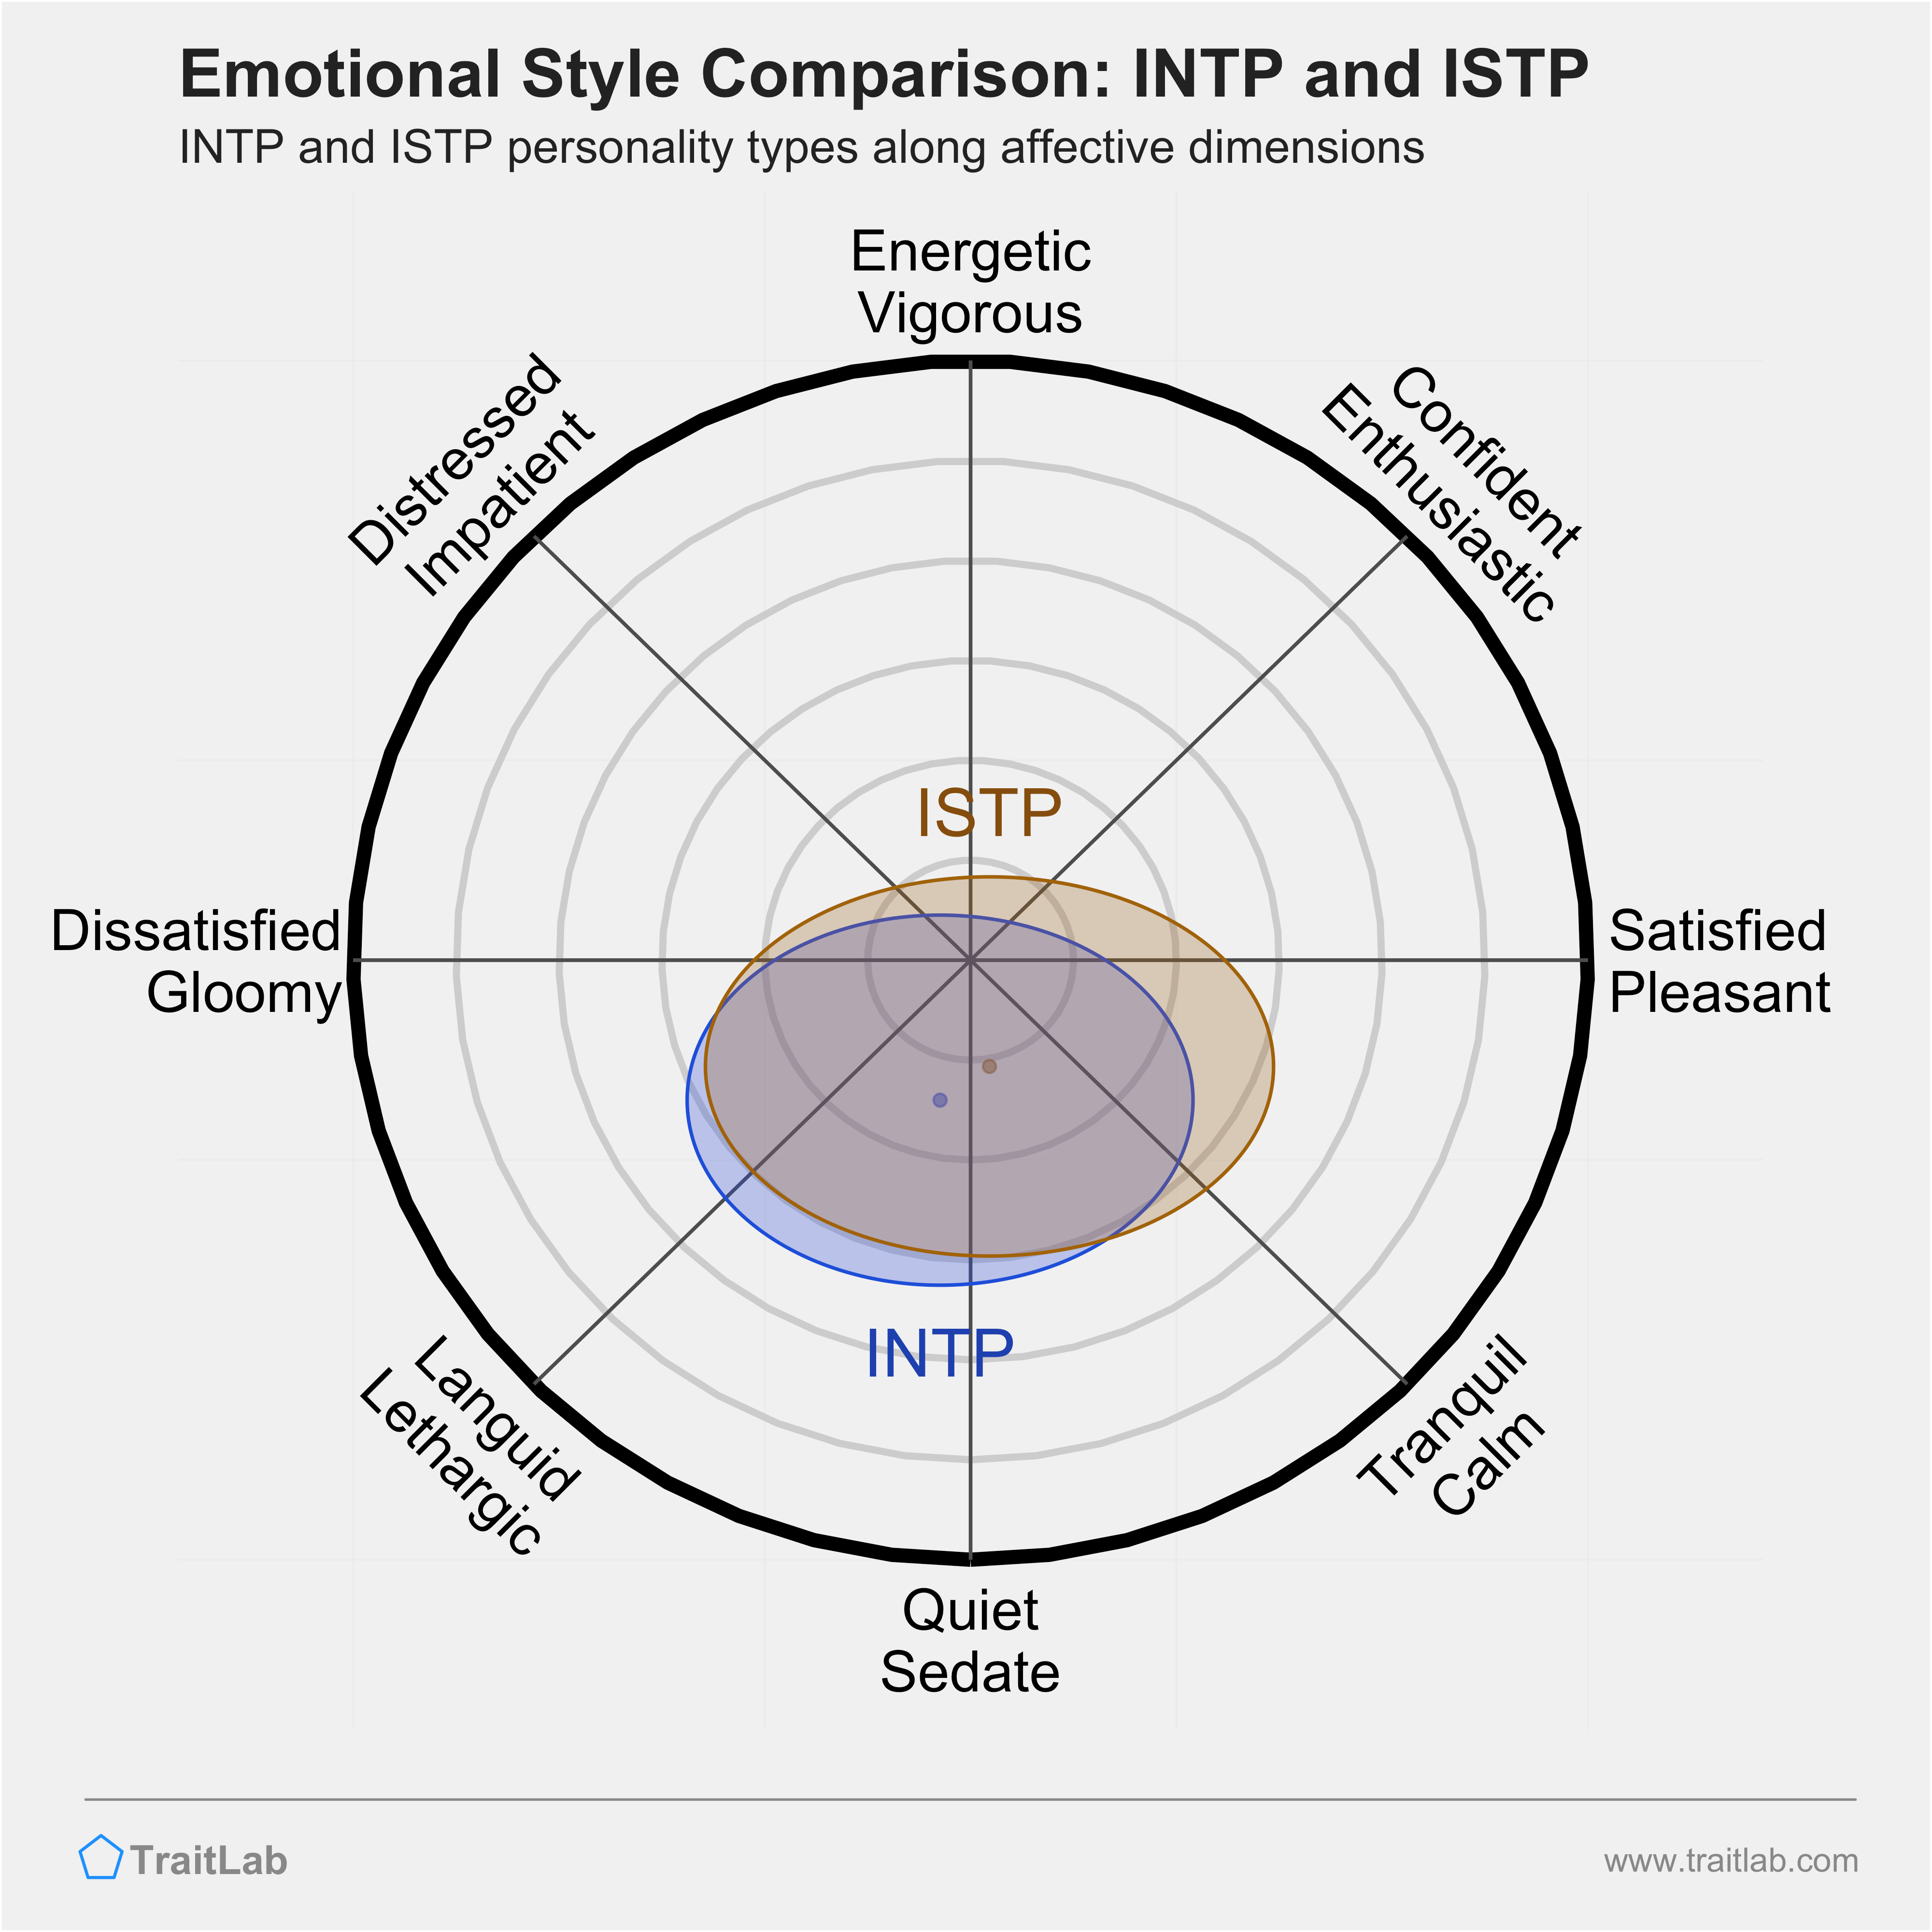 INTP and ISTP comparison across emotional (affective) dimensions